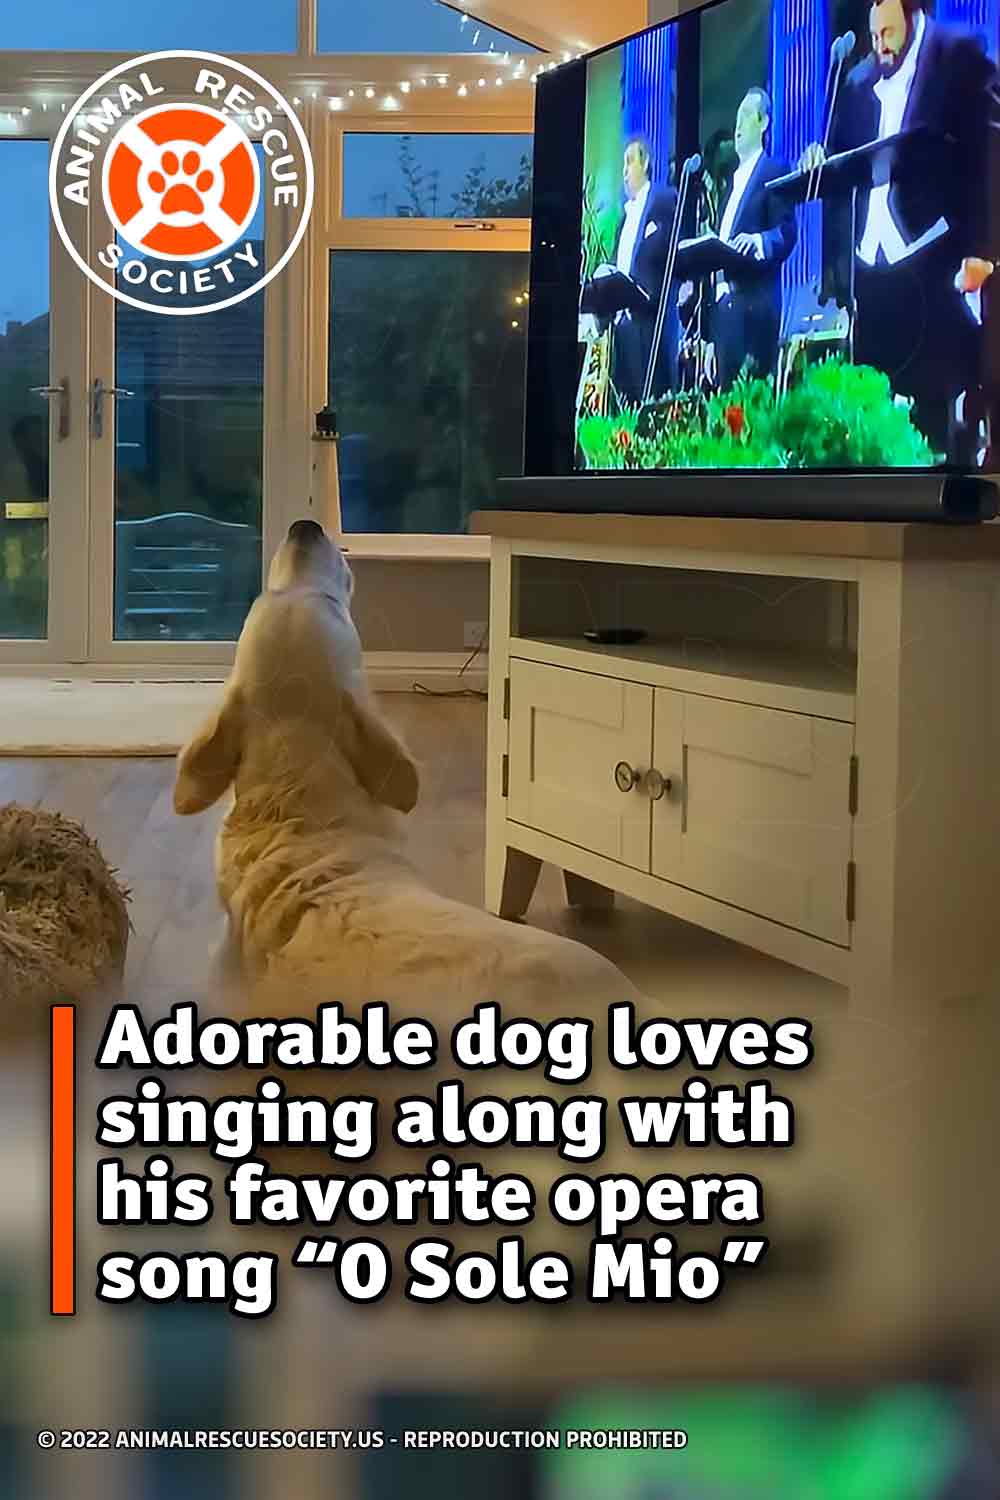 Adorable dog loves singing along with his favorite opera song “O Sole Mio”